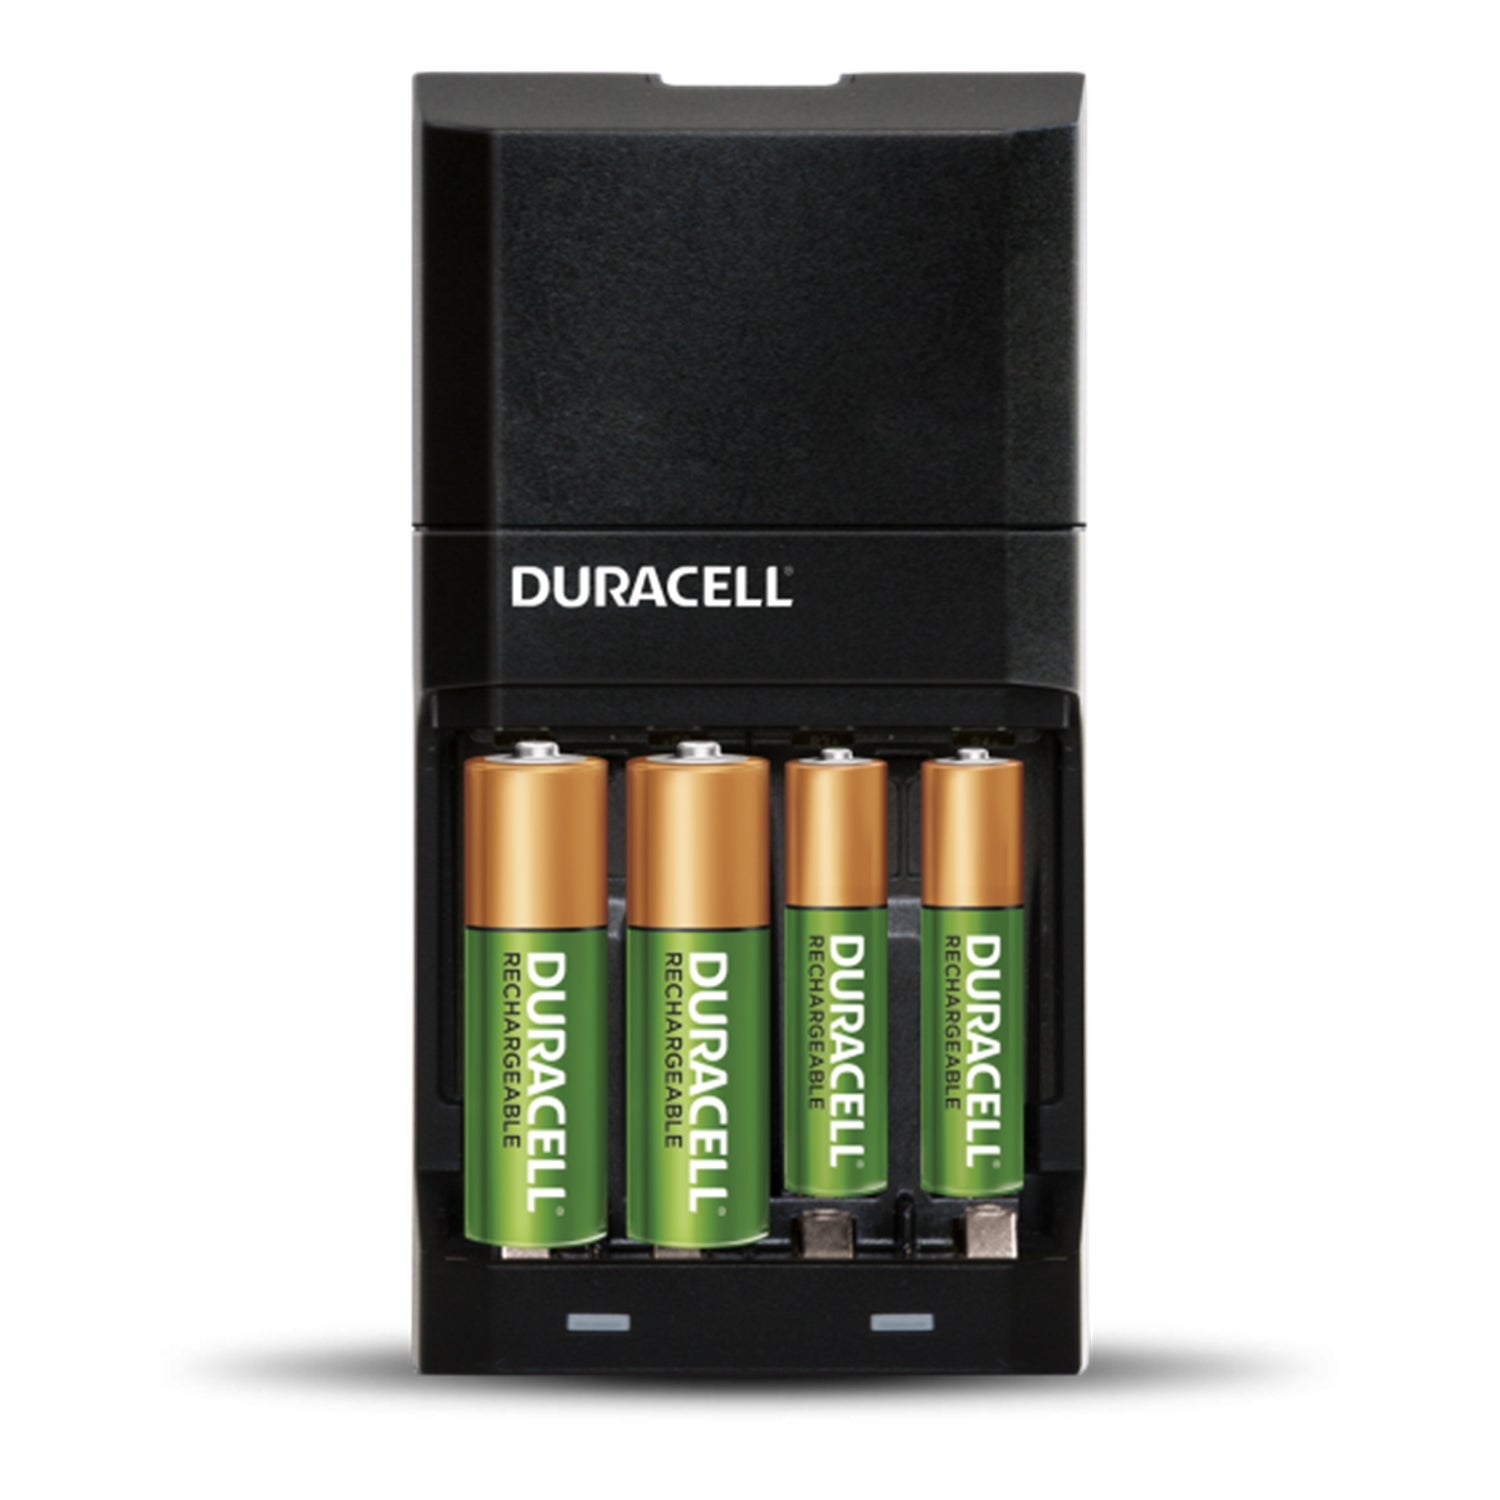 Duracell Optimum - Lot 12 Piles AAA Longue Duré, Emballage Refermable